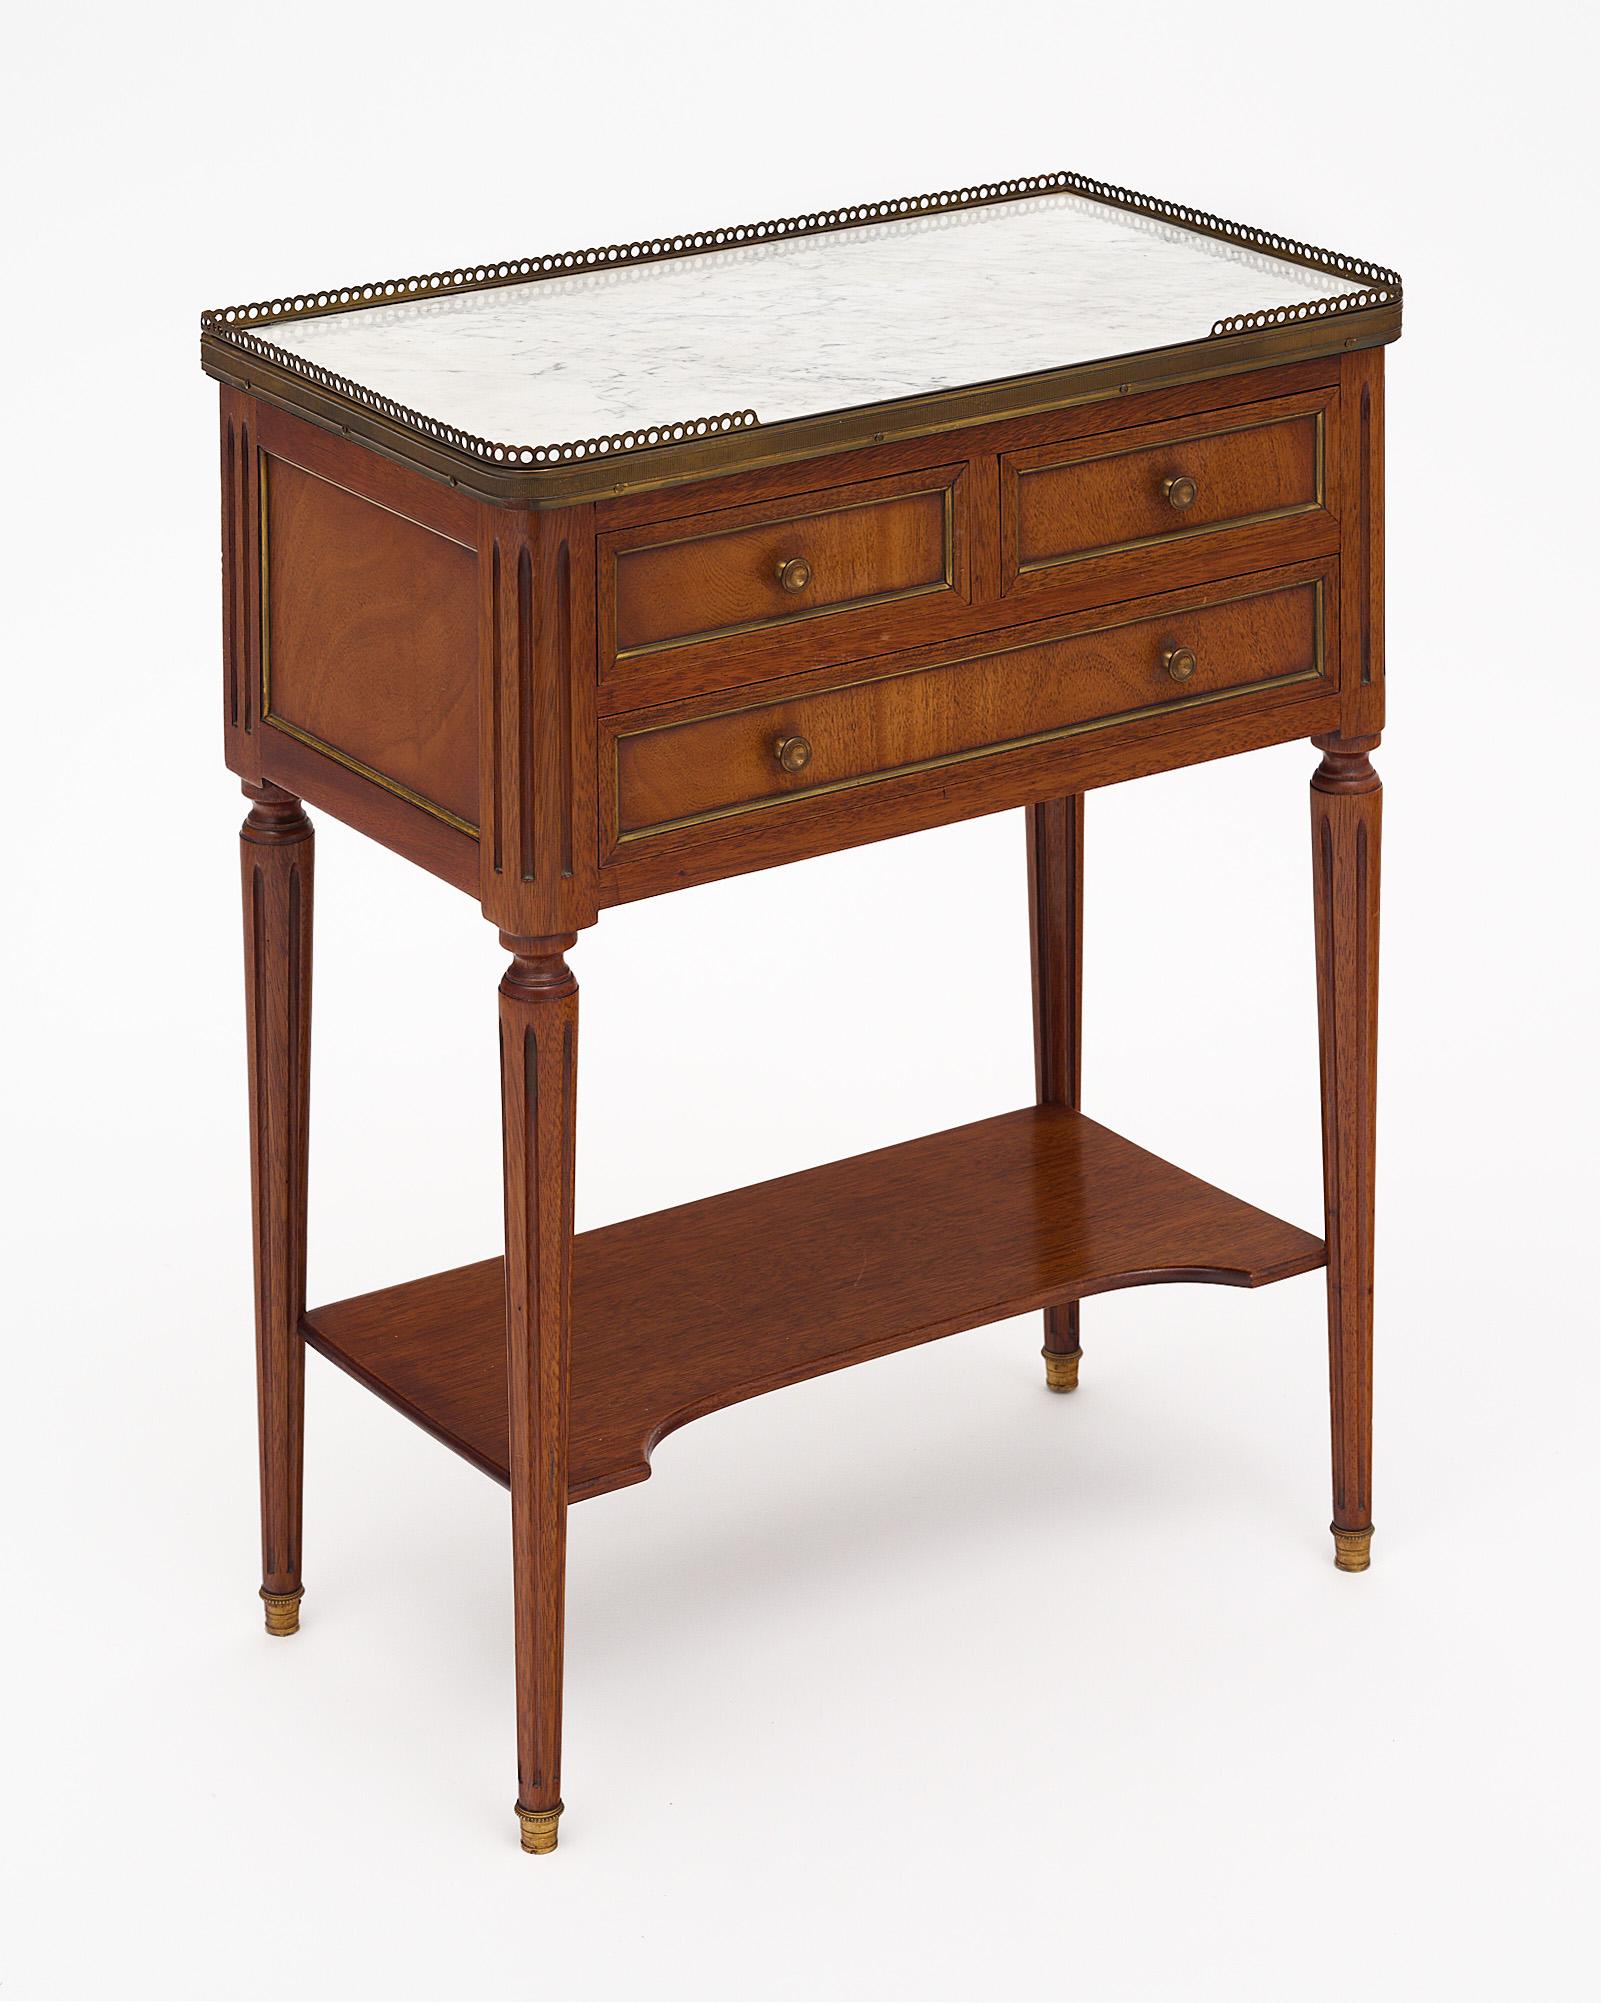 Side table in the Louis XVI style from France featuring a Carrara marble top and brass trim throughout. This piece has three dovetailed drawers and tapered; fluted legs. It has been finished with a lustrous French polish for a museum-quality shine.